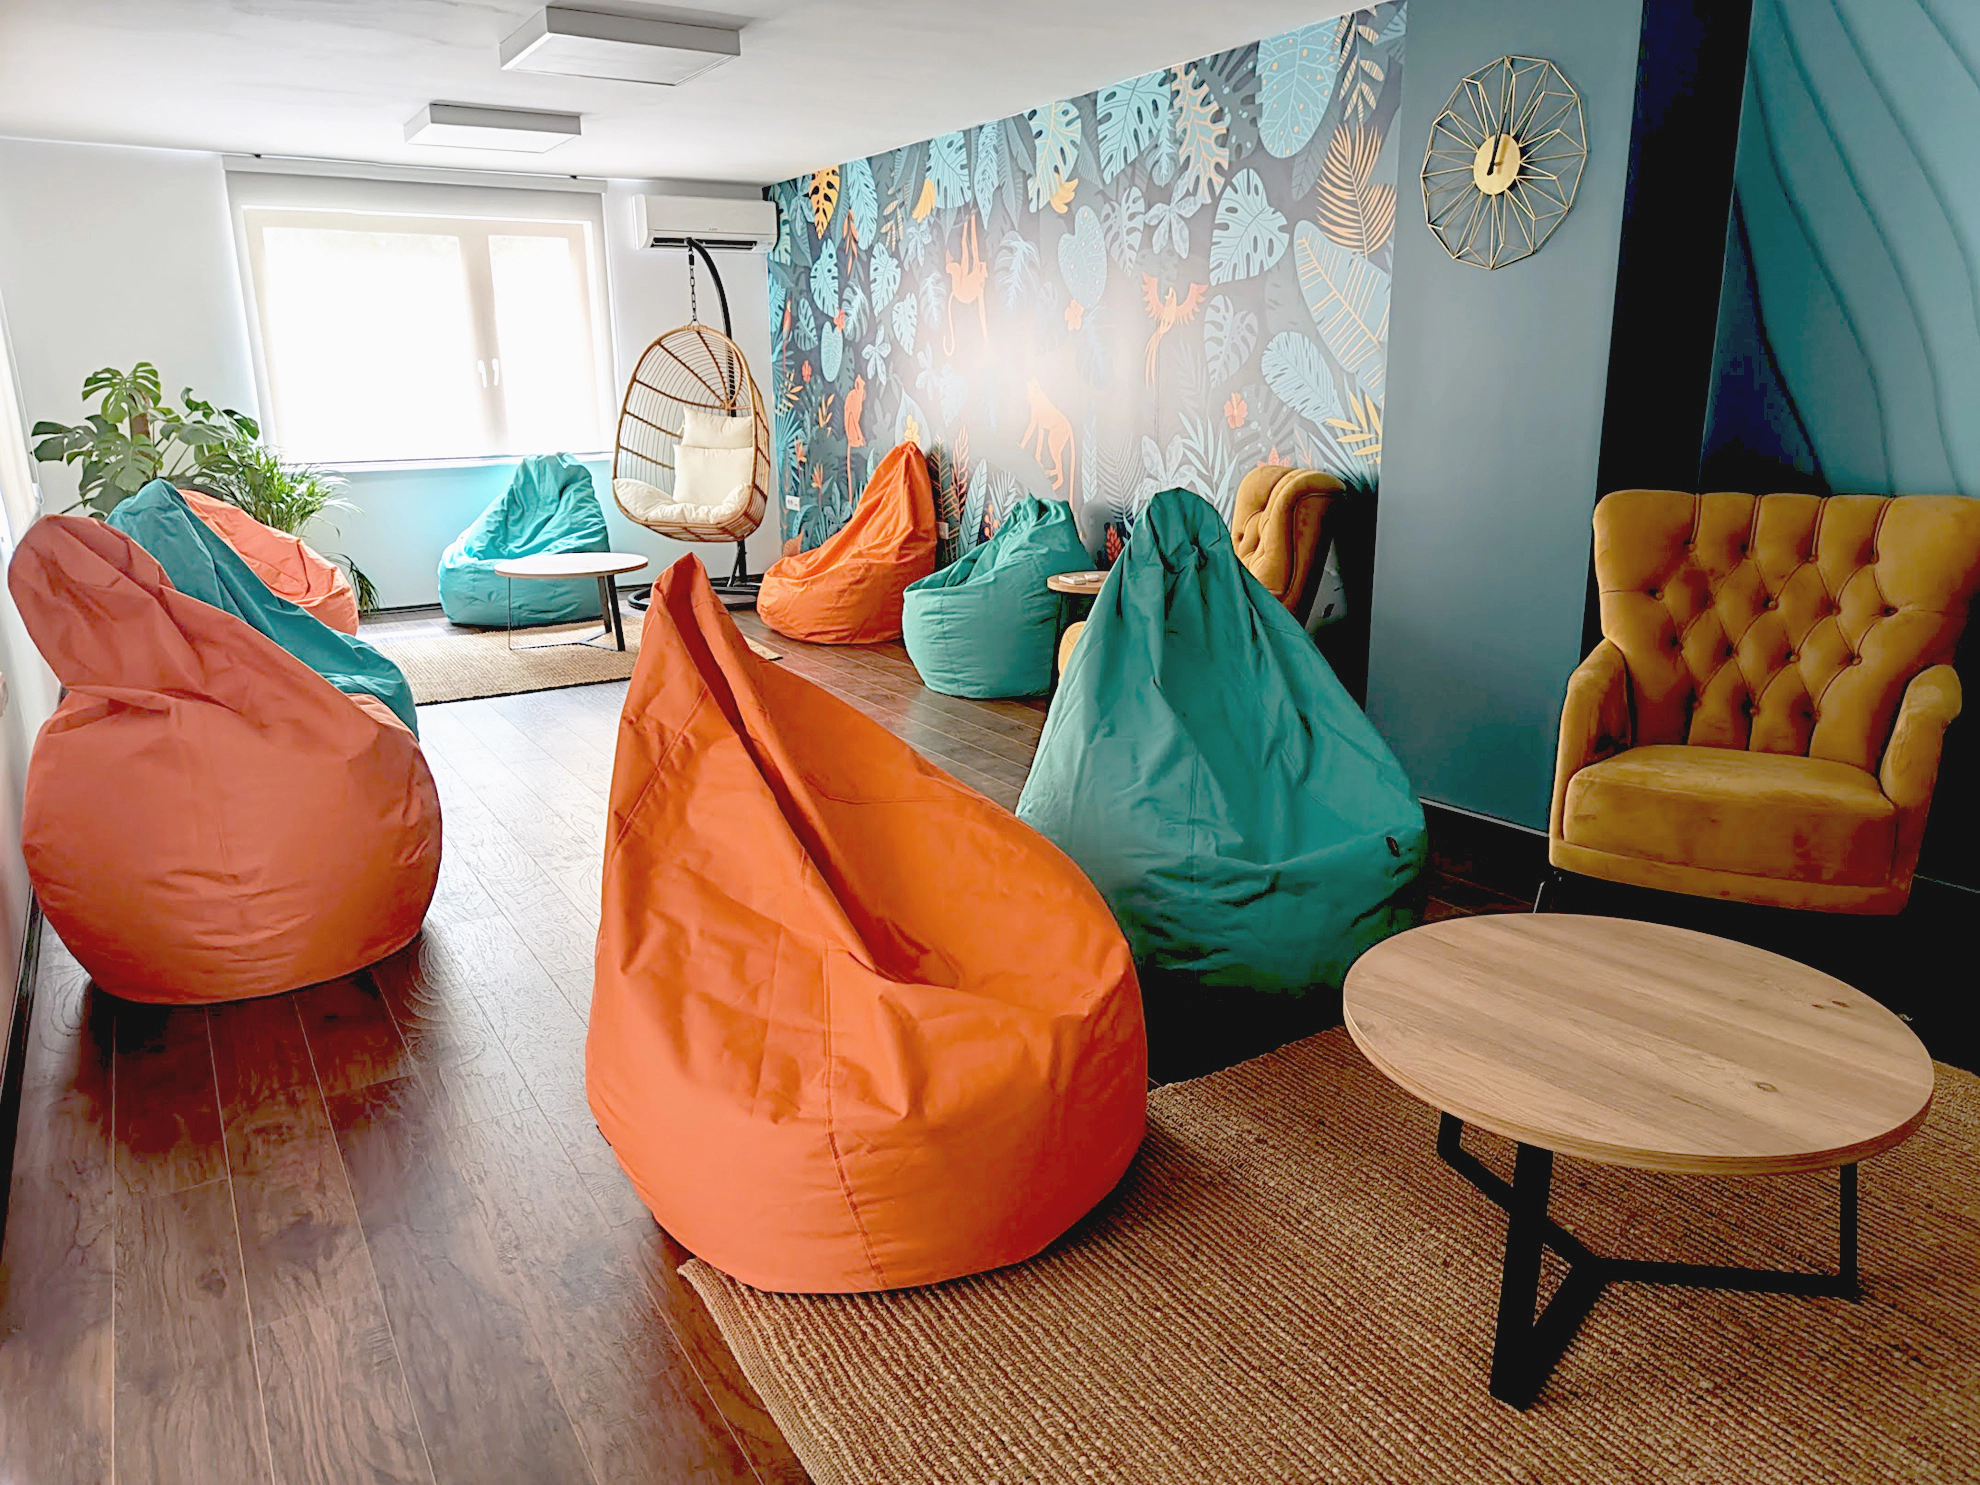 Pleasant meeting space with colorful wallpaper, beenbags and armchairs.